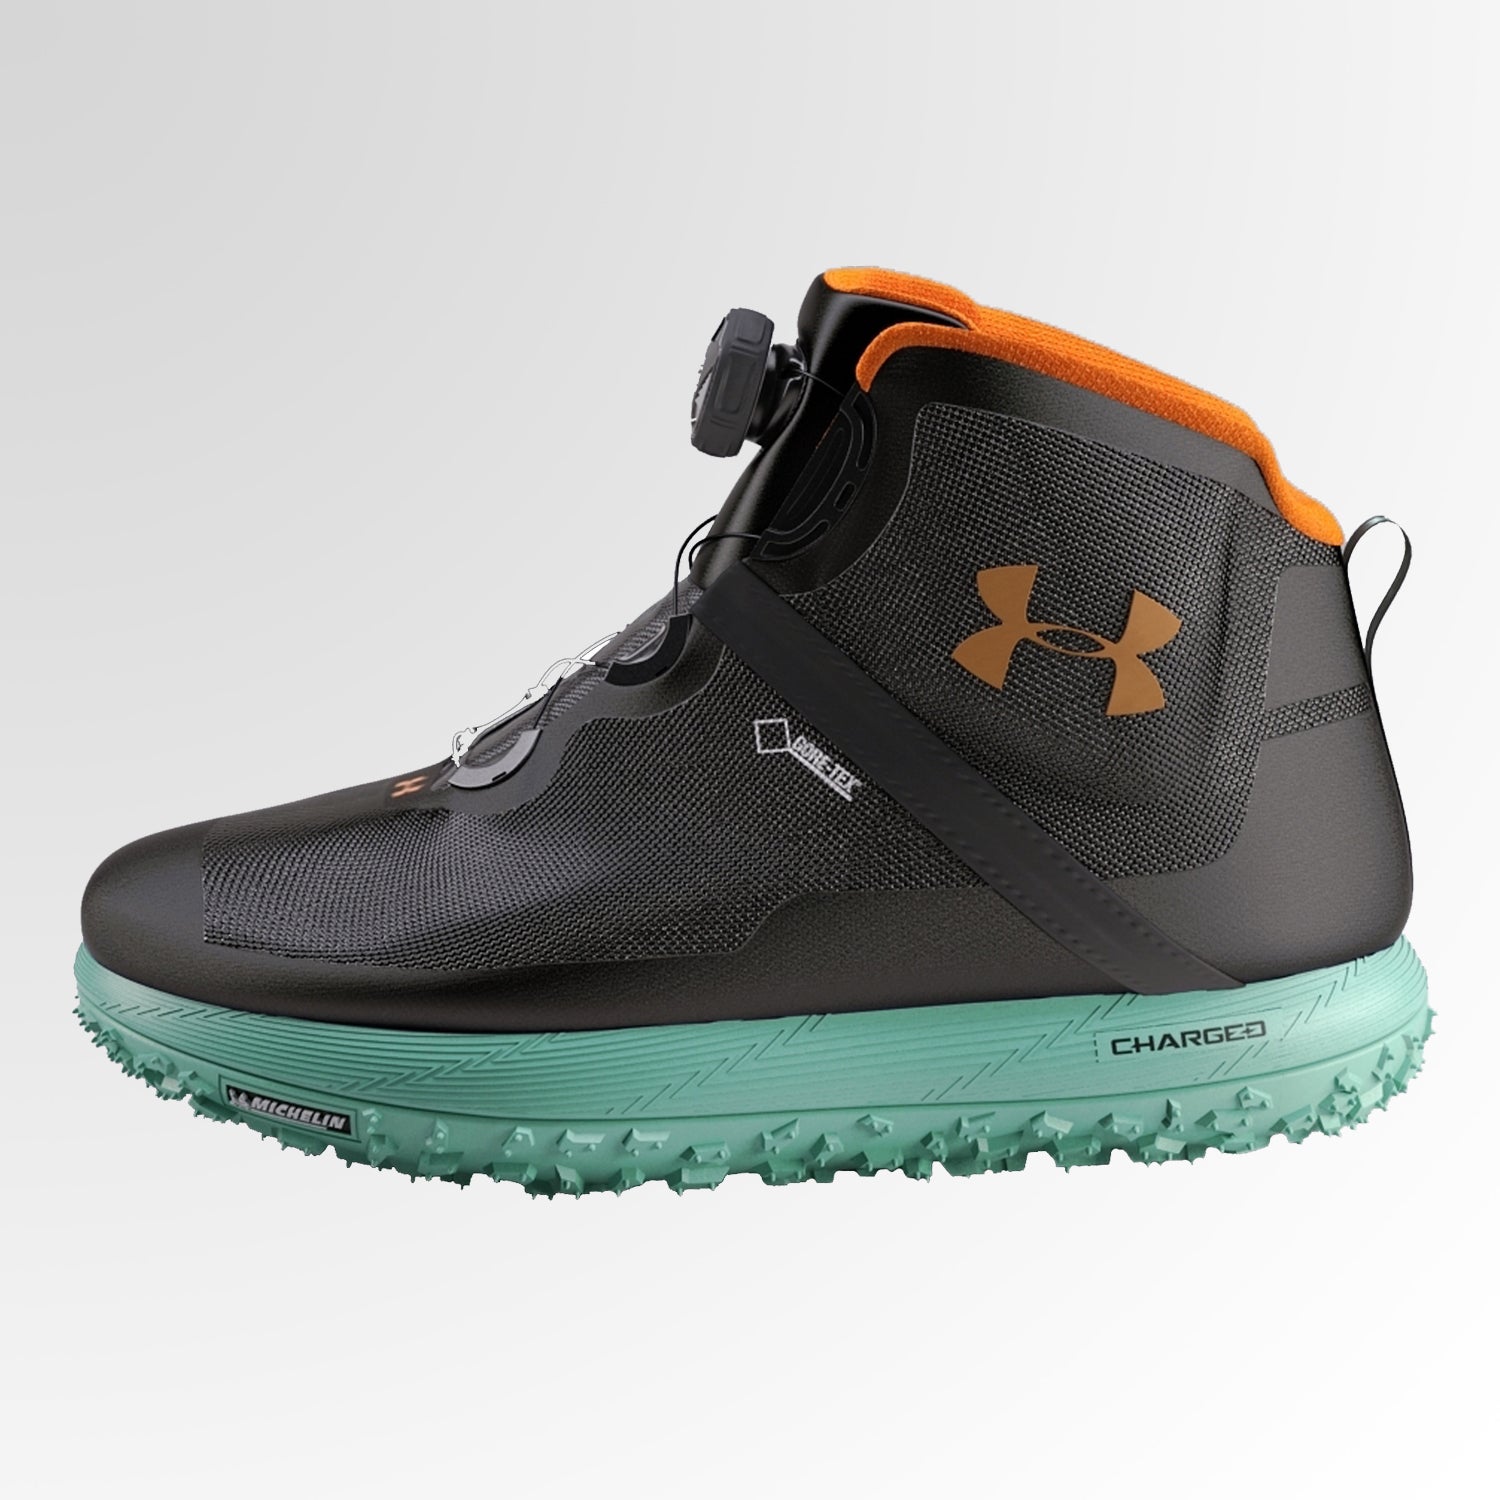 Gear of the Show 2015: Under Armour Fat Tire GTX Shoes